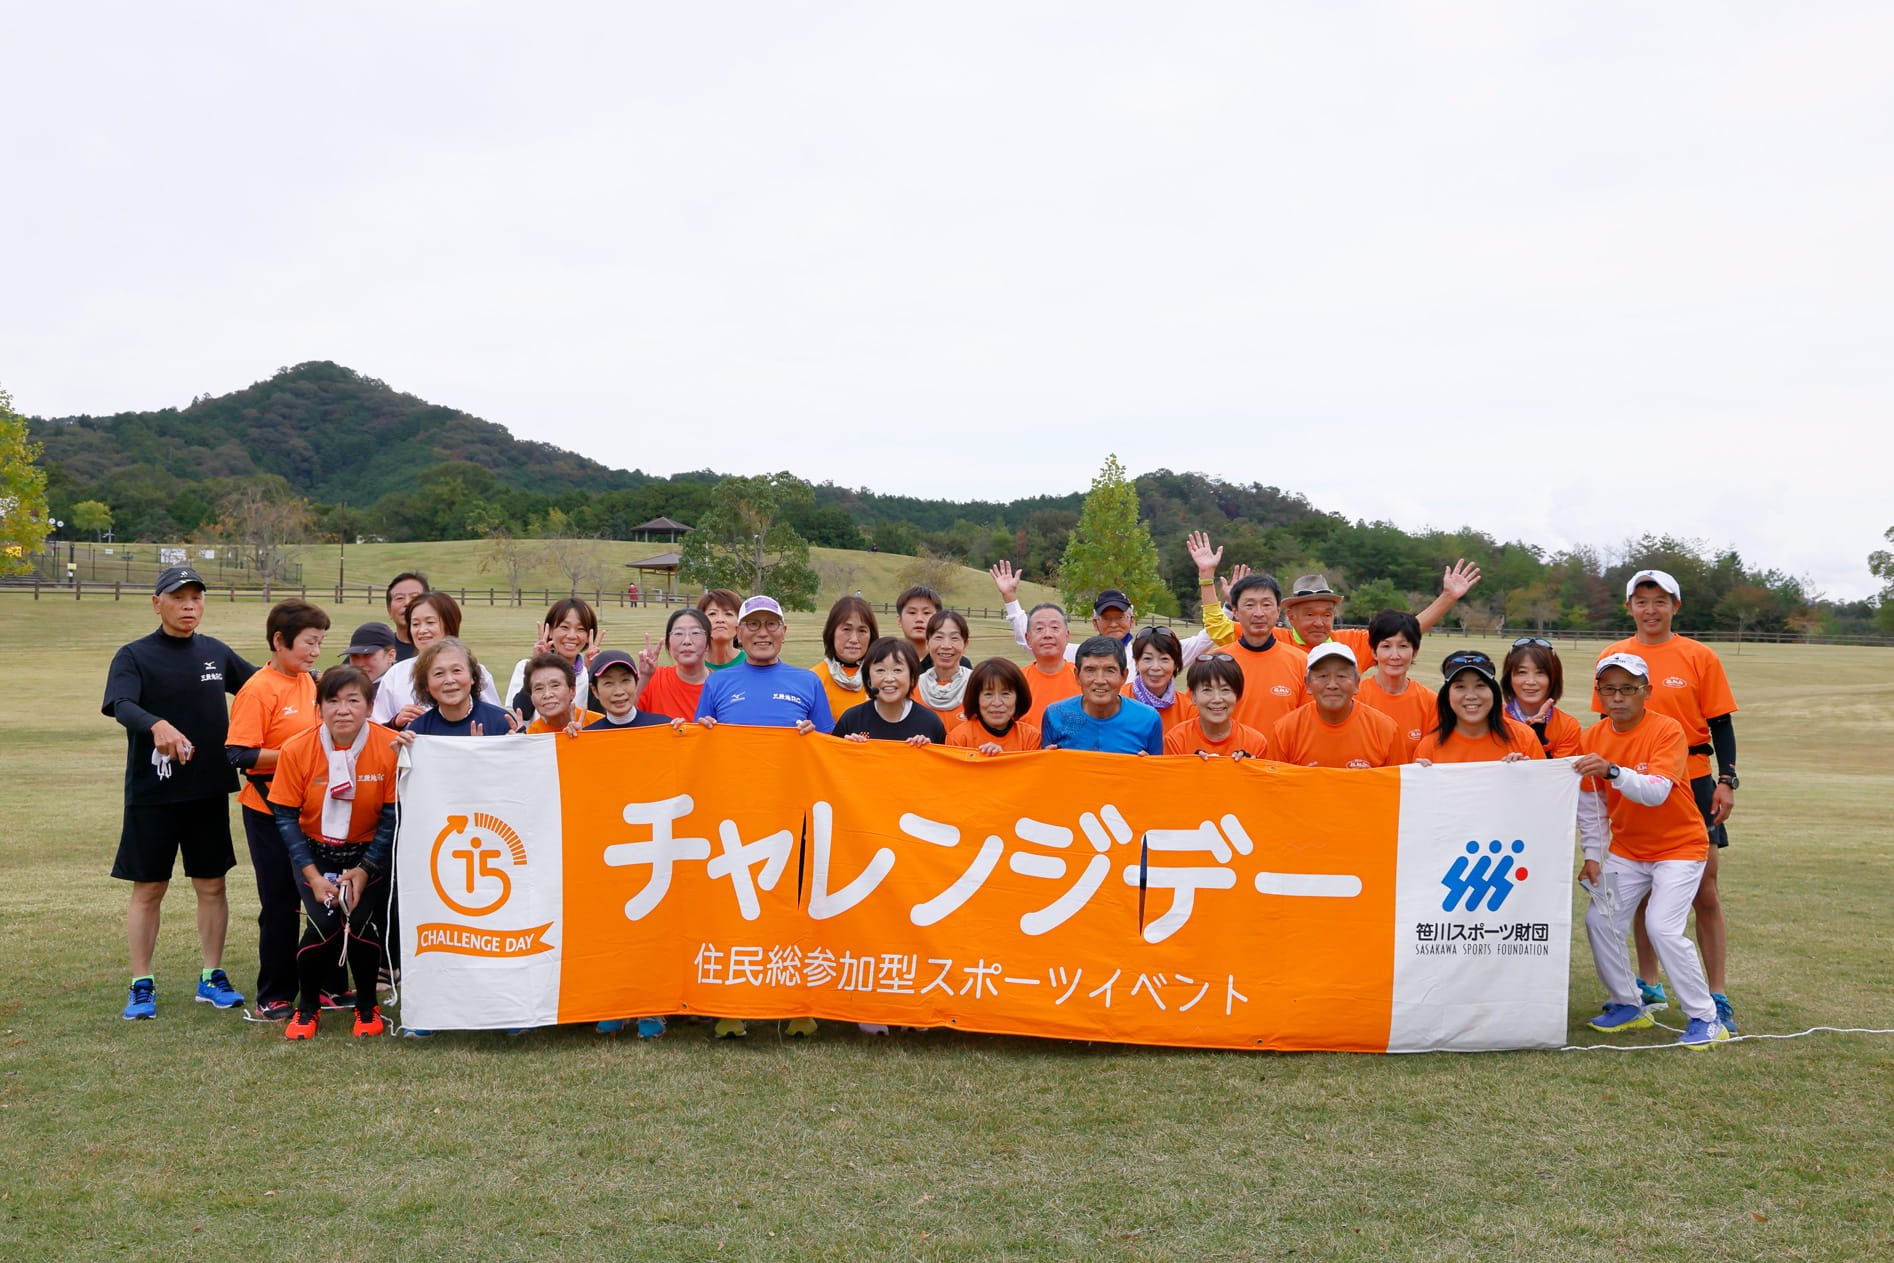 Multiple local sports groups participated in Challenge Day 2021 in Fukuchiyama.